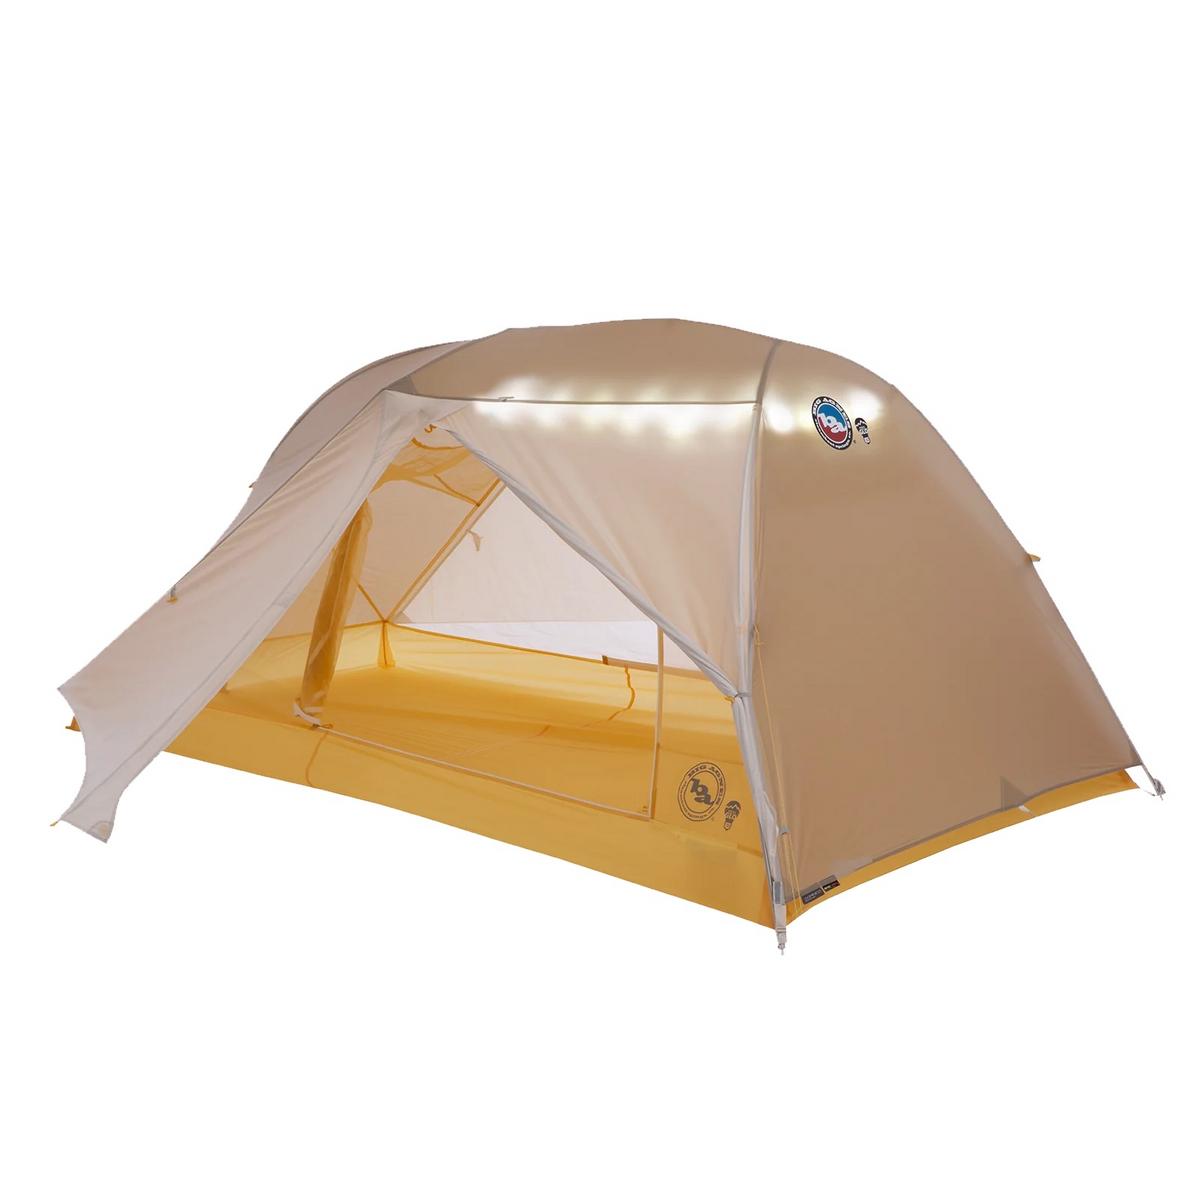 Big Agnes Tigerwall UL2 mtnGLO Solution Dye Tent